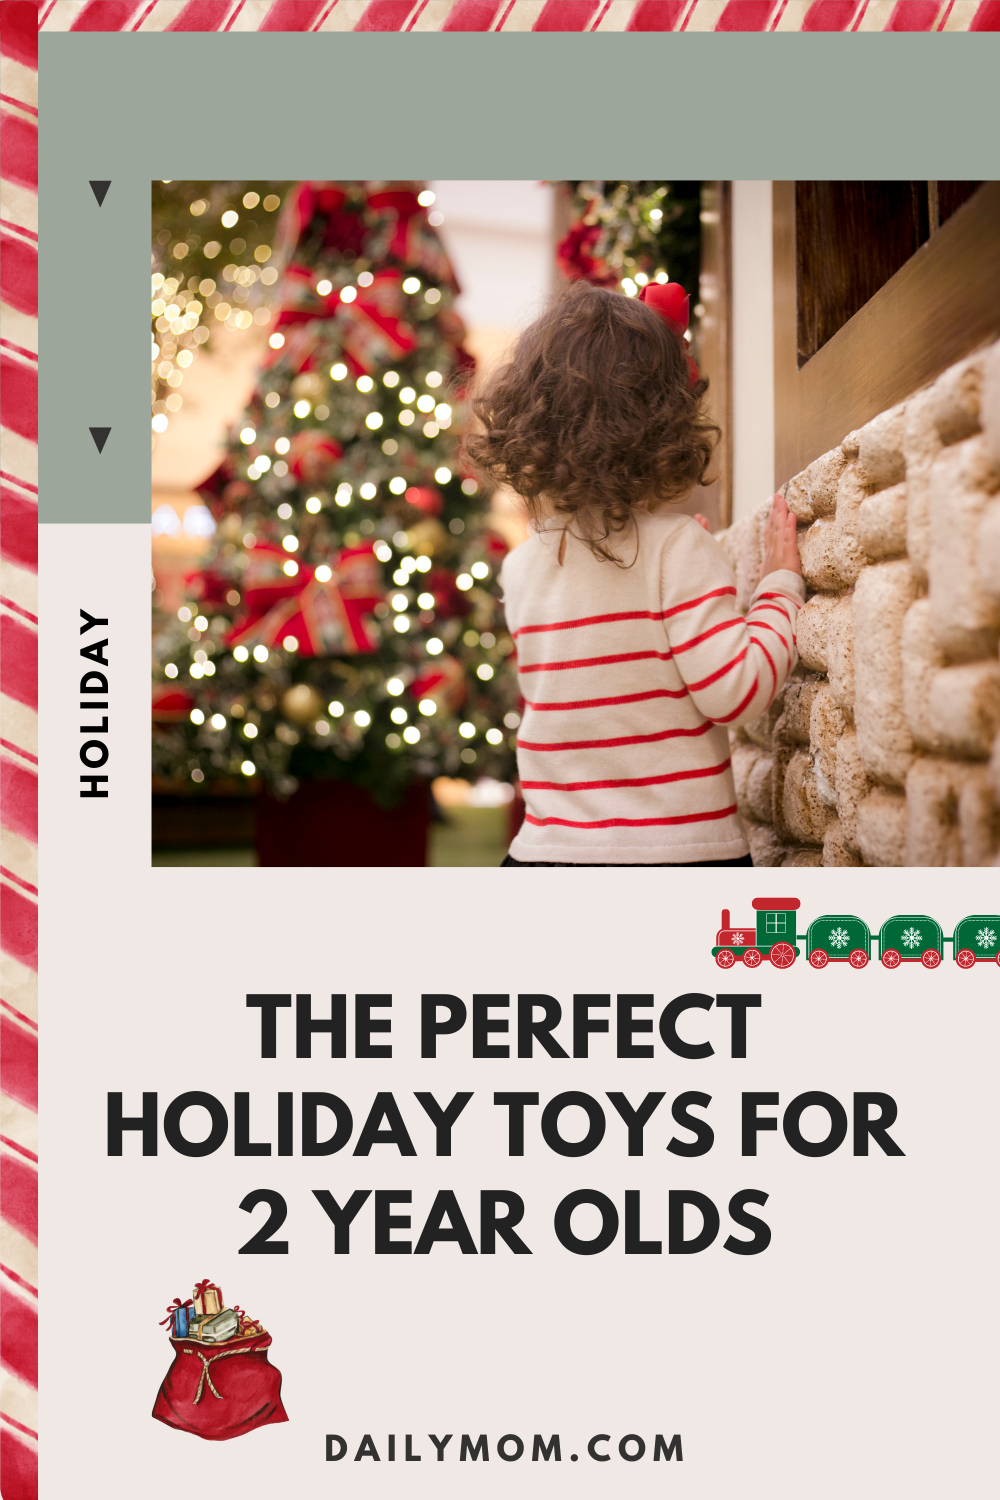 The Perfect Toys For 2 Year Olds To Inspire Wonder And Joy